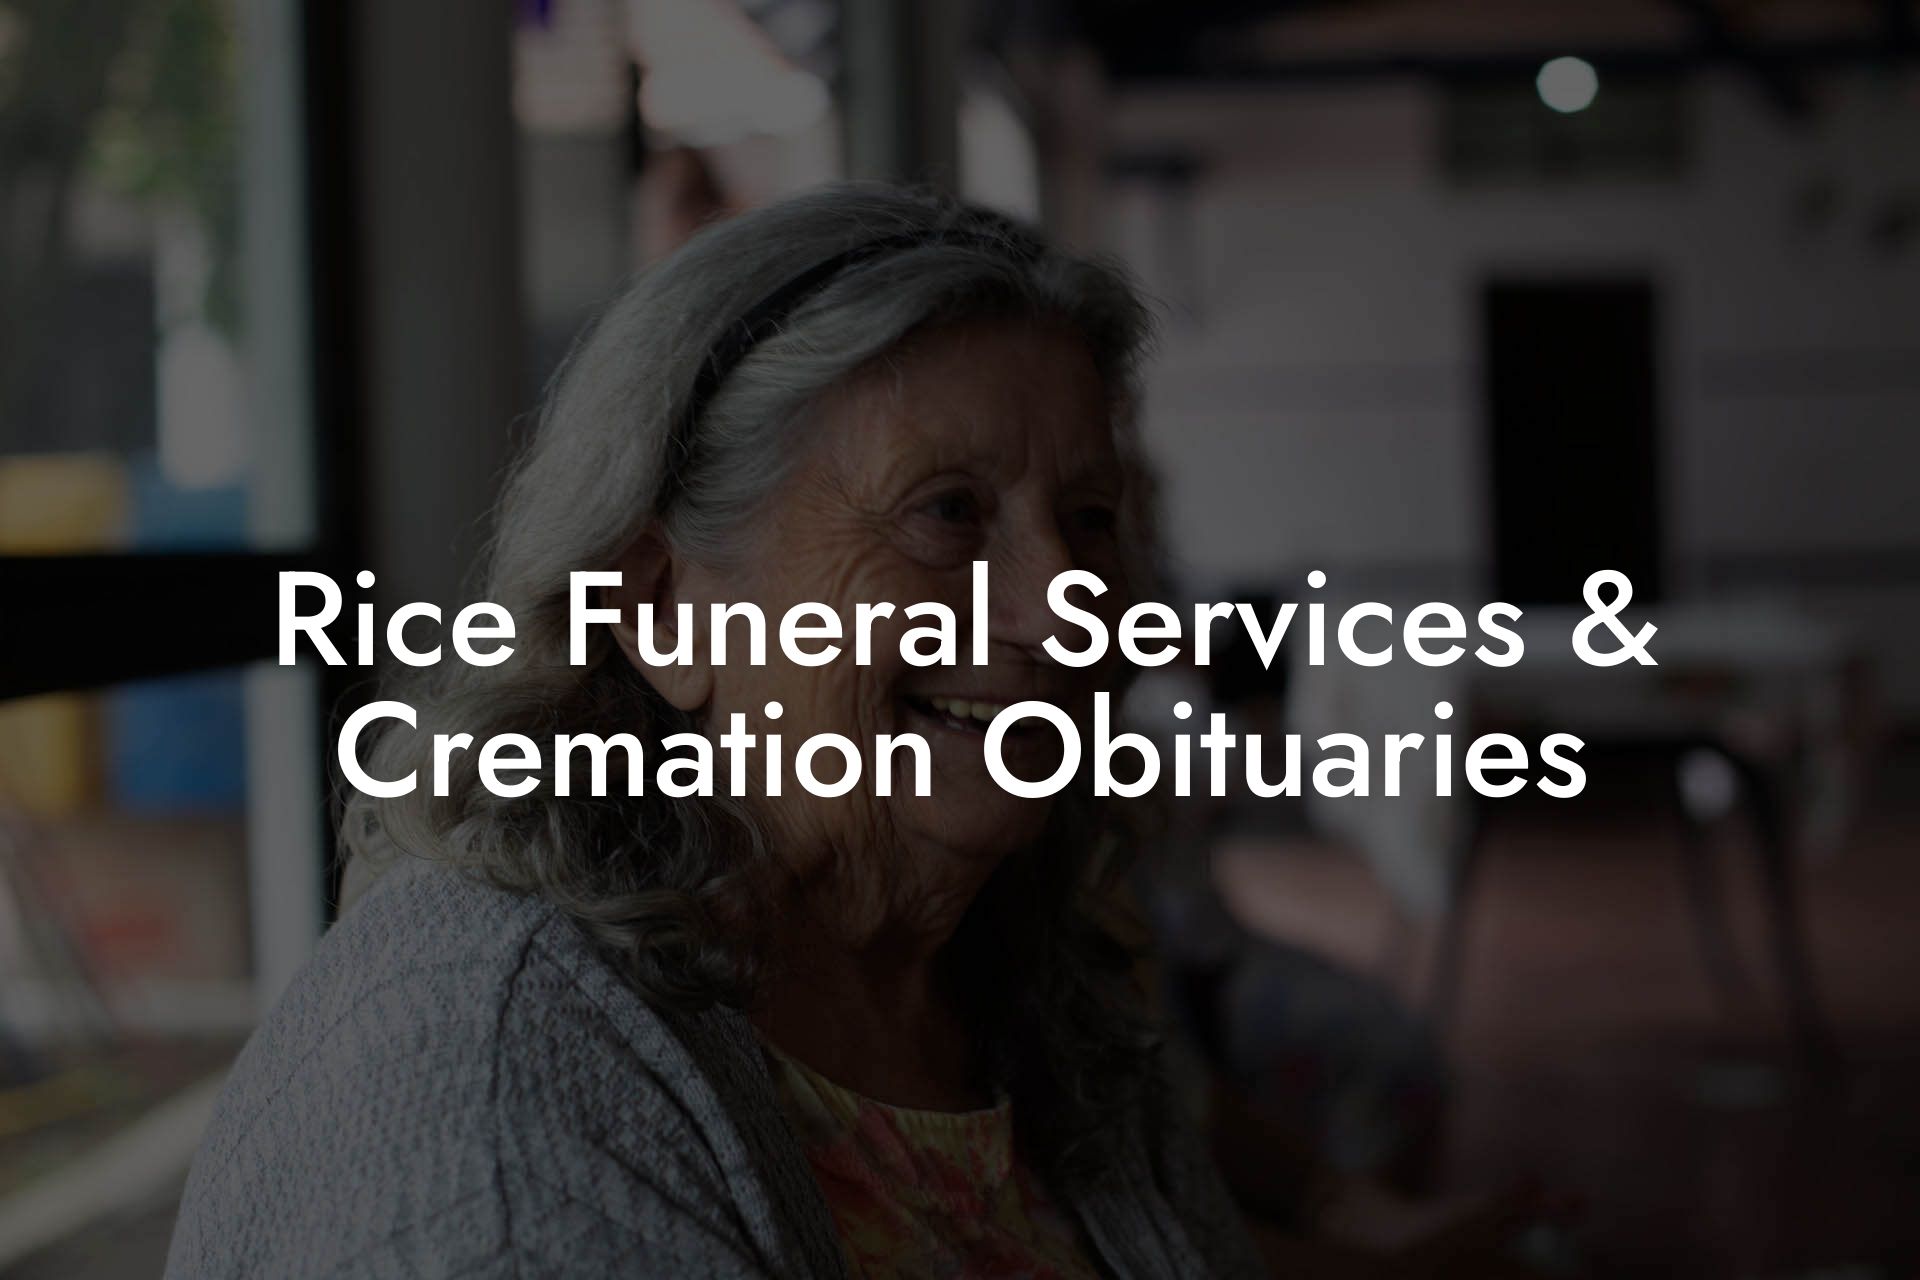 Rice Funeral Services & Cremation Obituaries